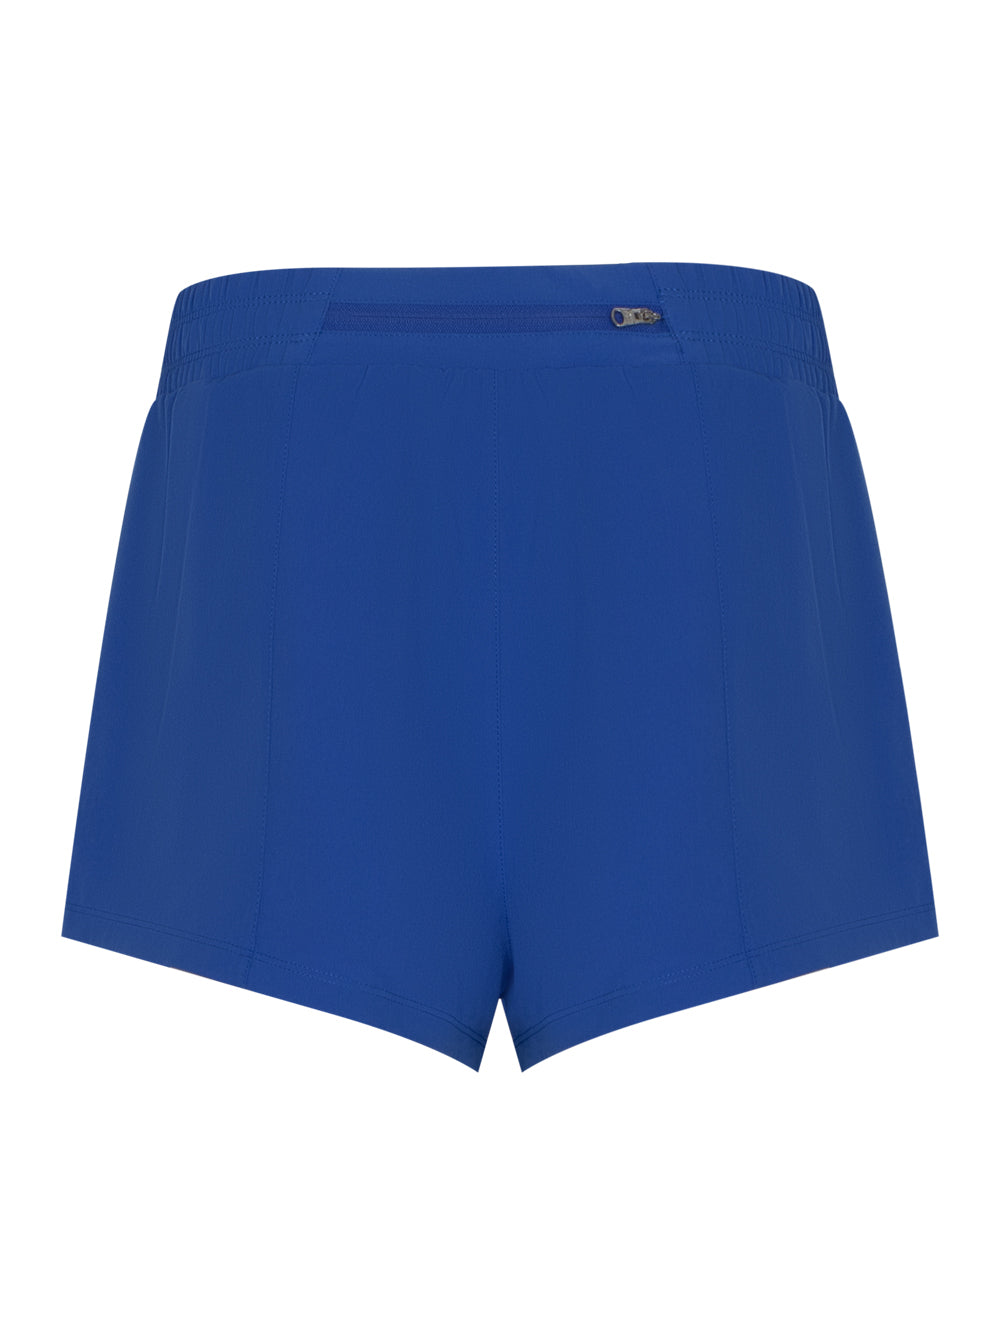 Double Layer Training Short With Runners Pocket And Hd Logo (Amparo Blue)